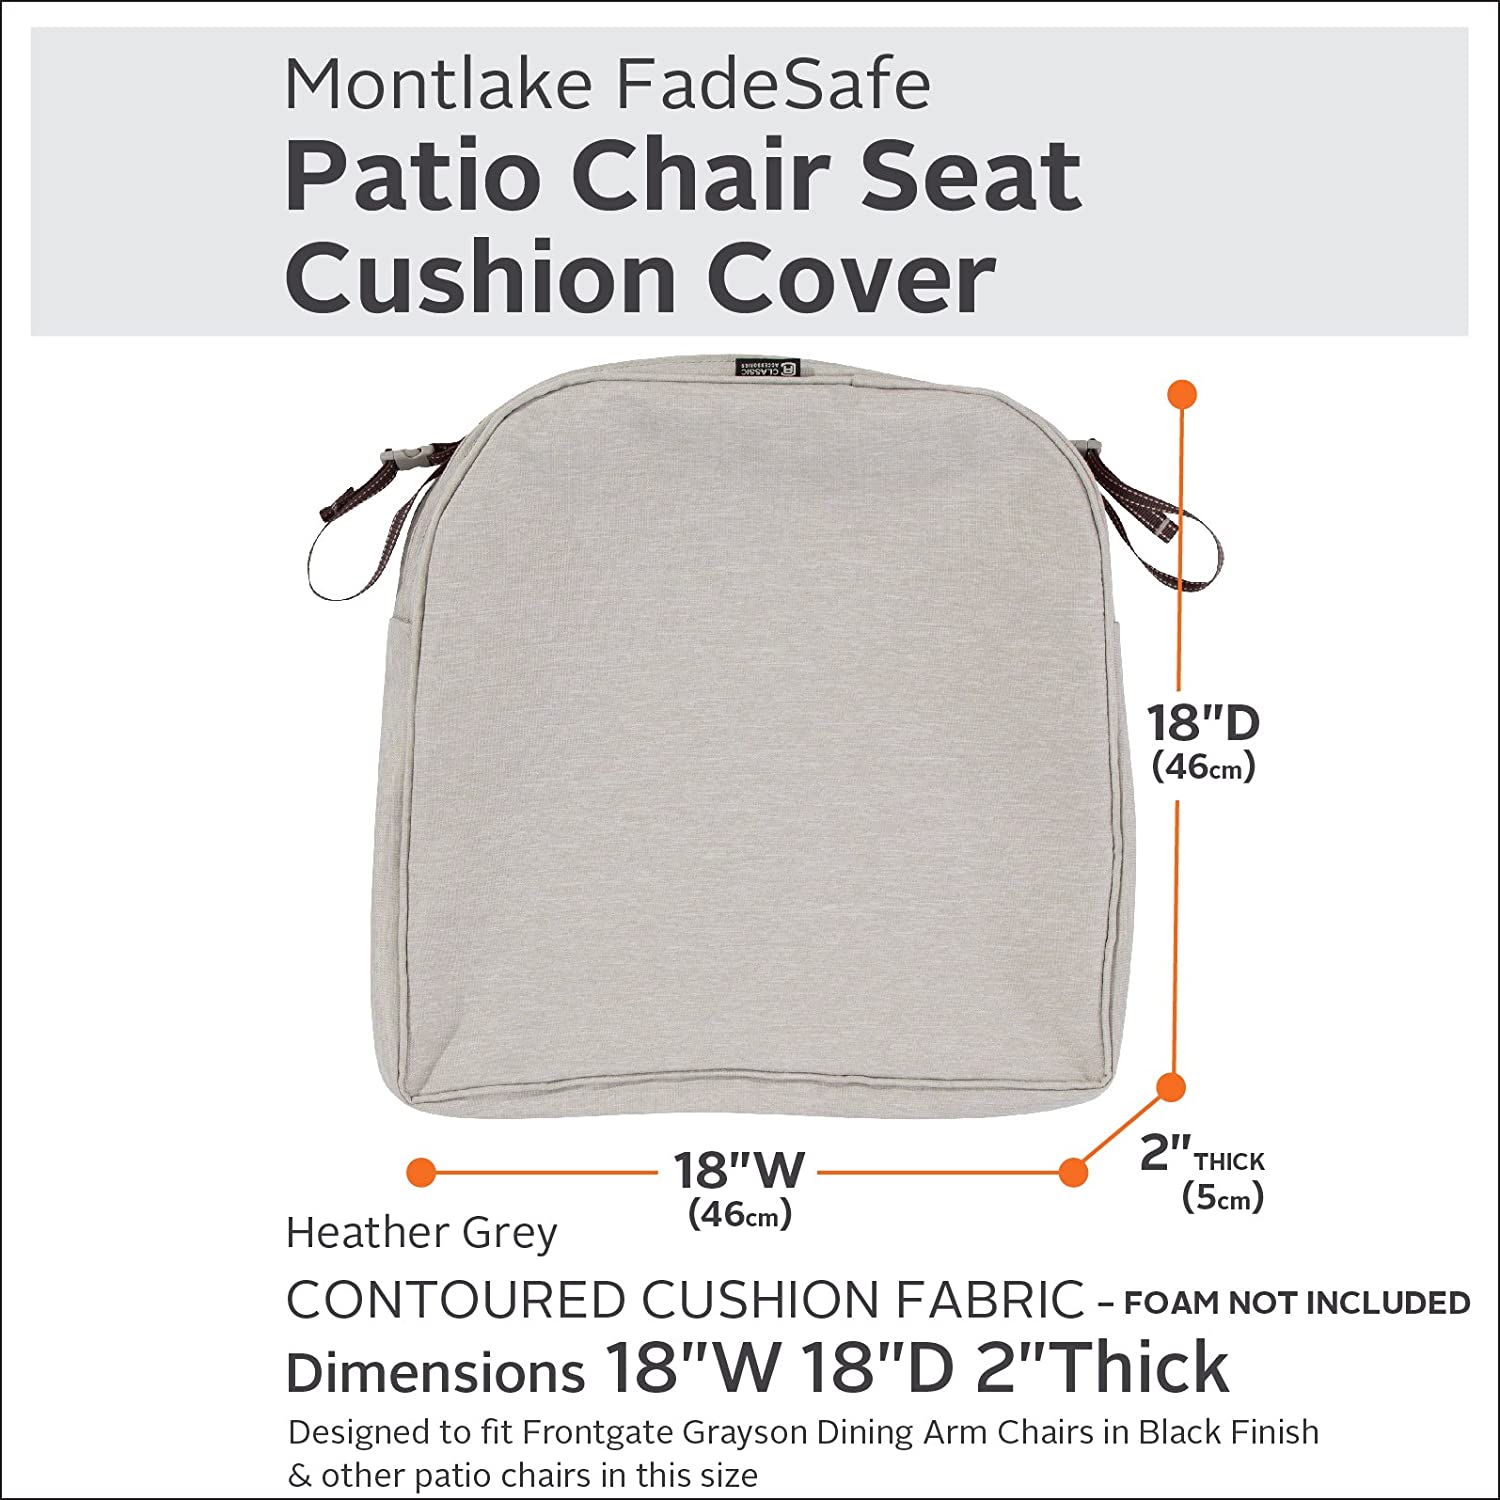 Classic Accessories Montlake Water-Resistant 18 x 18 x 2 Inch Square Outdoor Seat Cushion Slip Cover, Patio Furniture Chair Cushion Cover, Heather Grey, Patio Furniture Cushion Covers